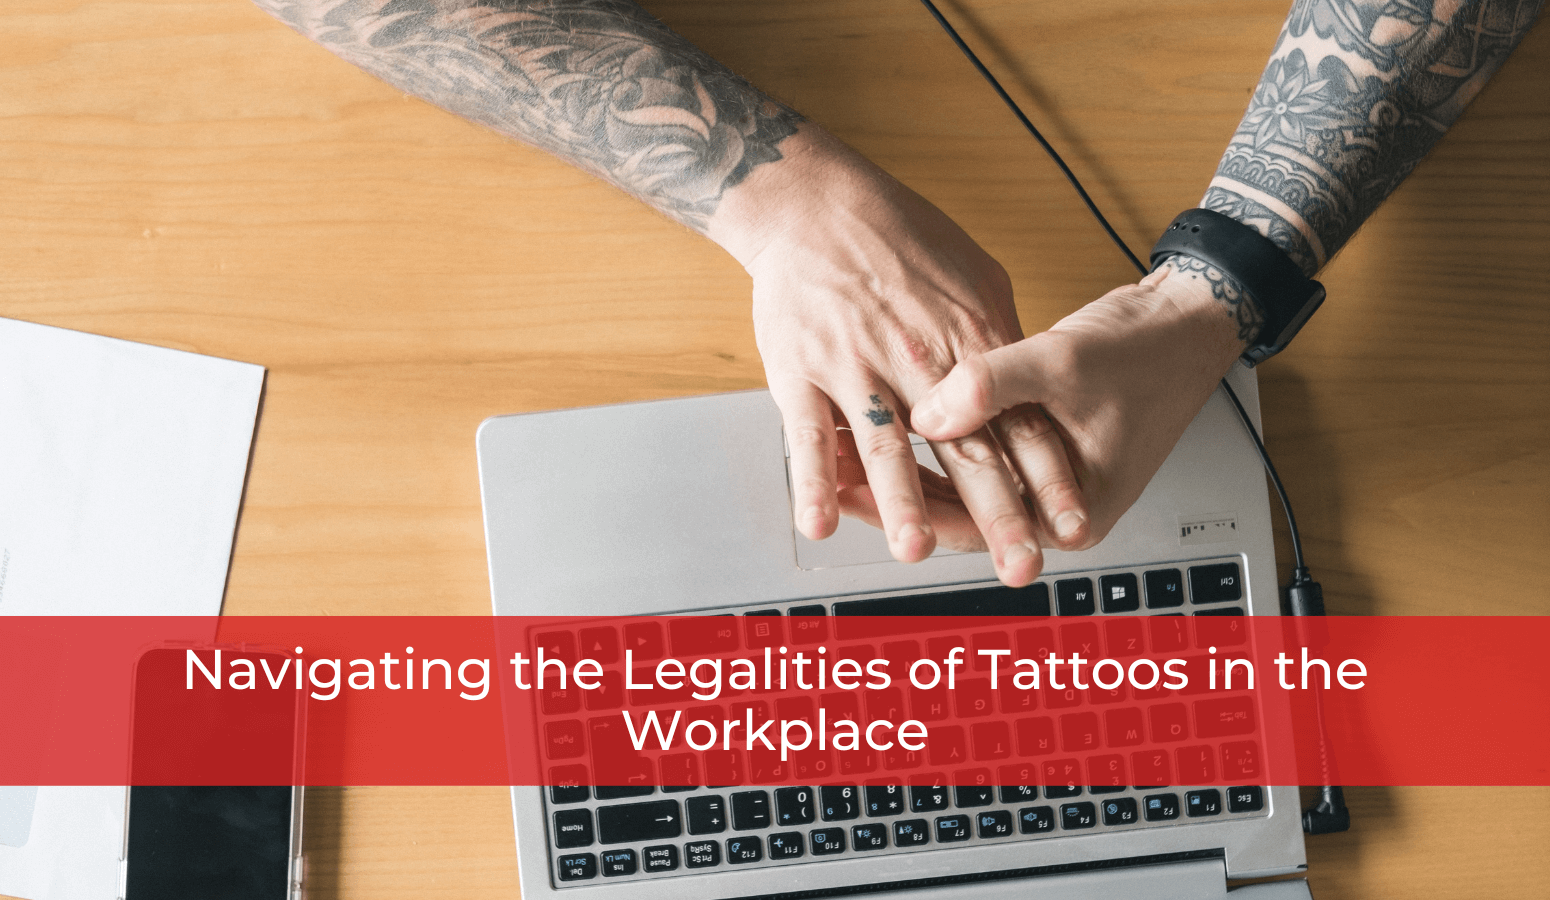 Featured image for “Navigating the Legalities of Tattoos in the Workplace”